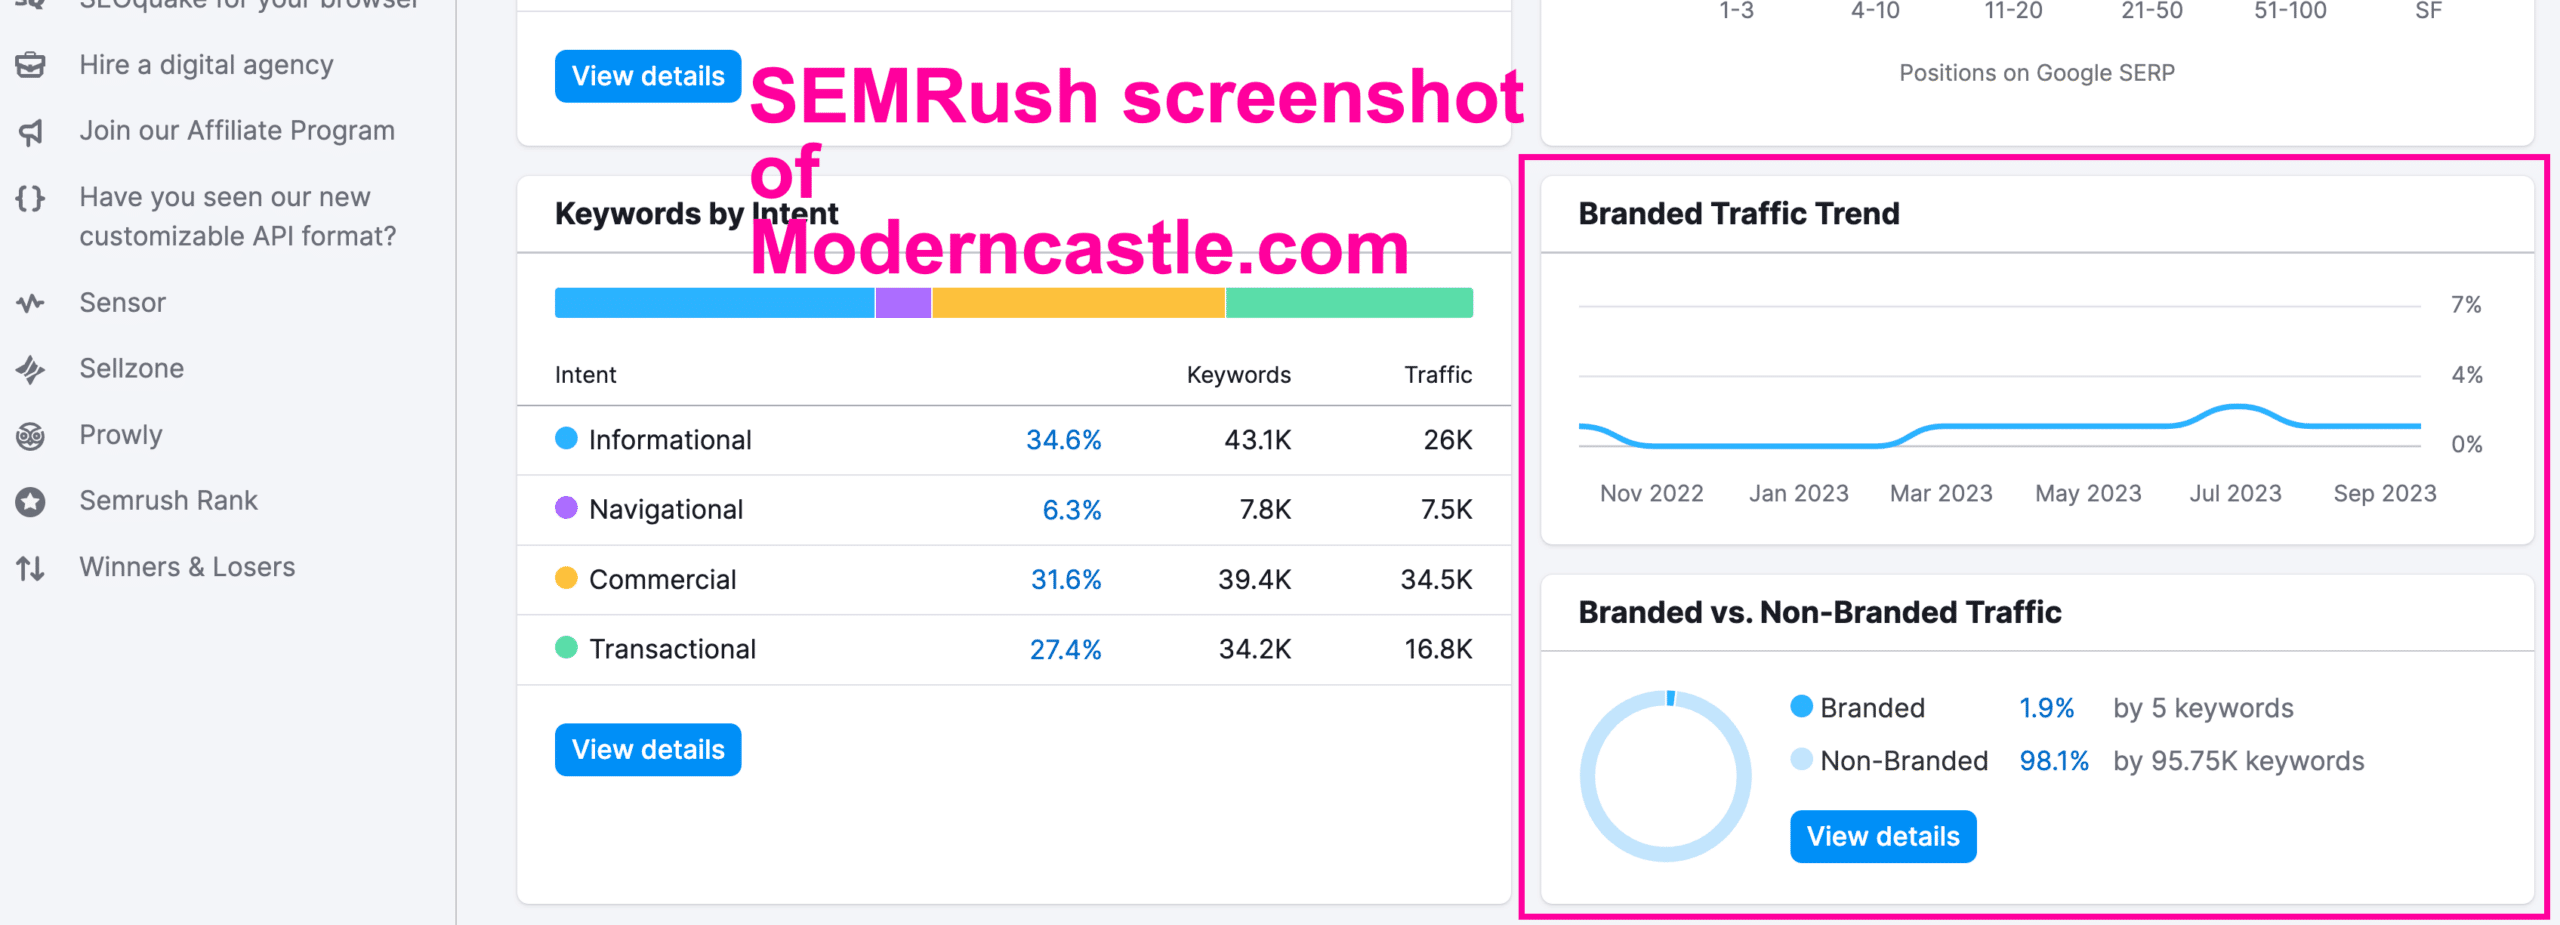 SEMrush report of the branded / non-branded search traffic to the website moderncastle.com